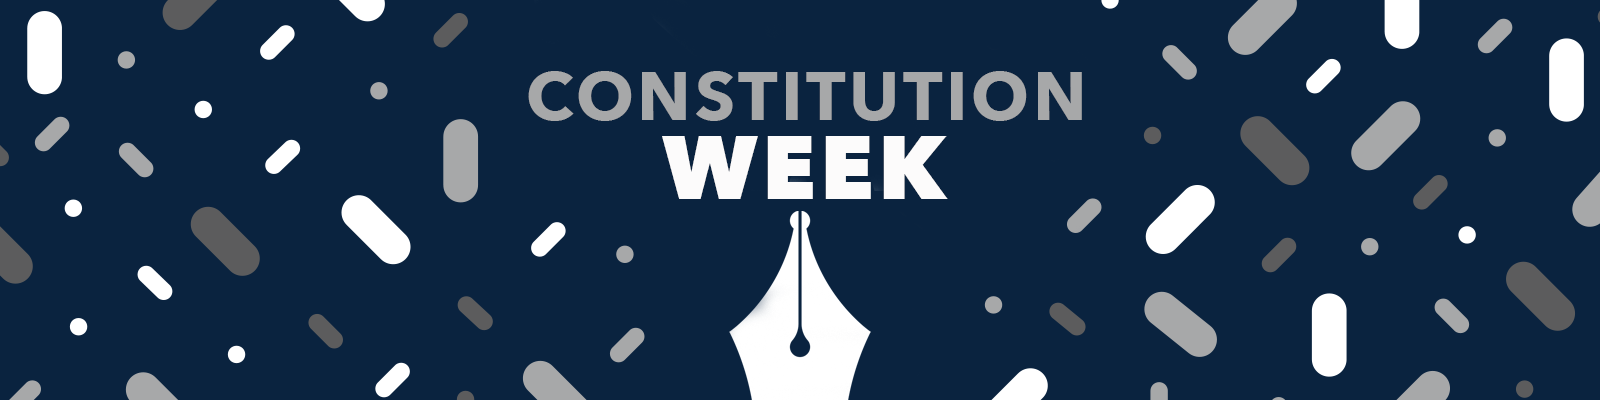 constitution week with gray and white confetti